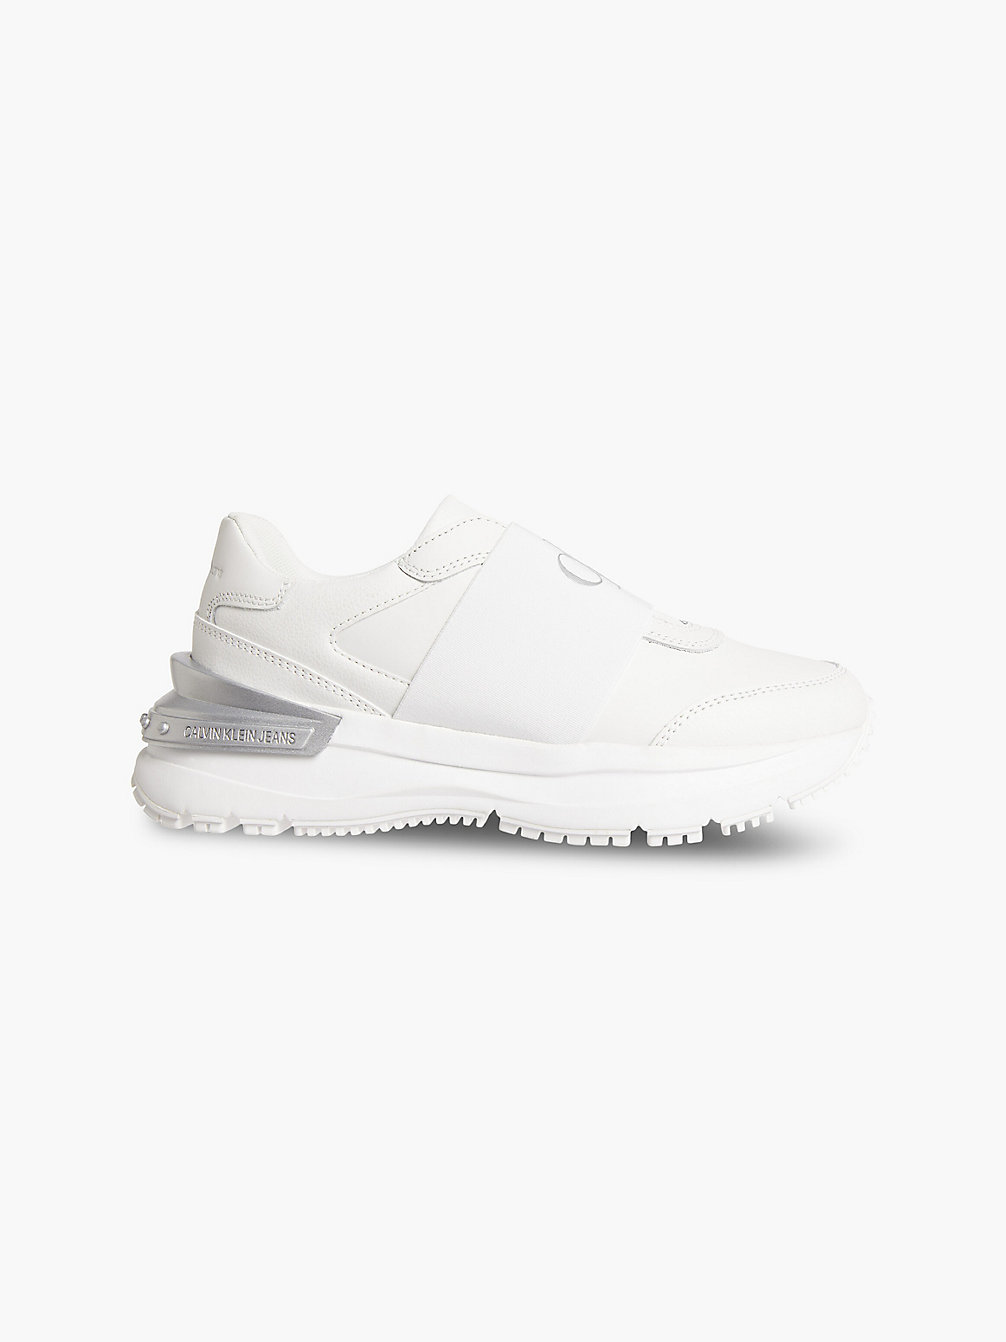 WHITE/SILVER Chunky Slip-On Trainers undefined women Calvin Klein